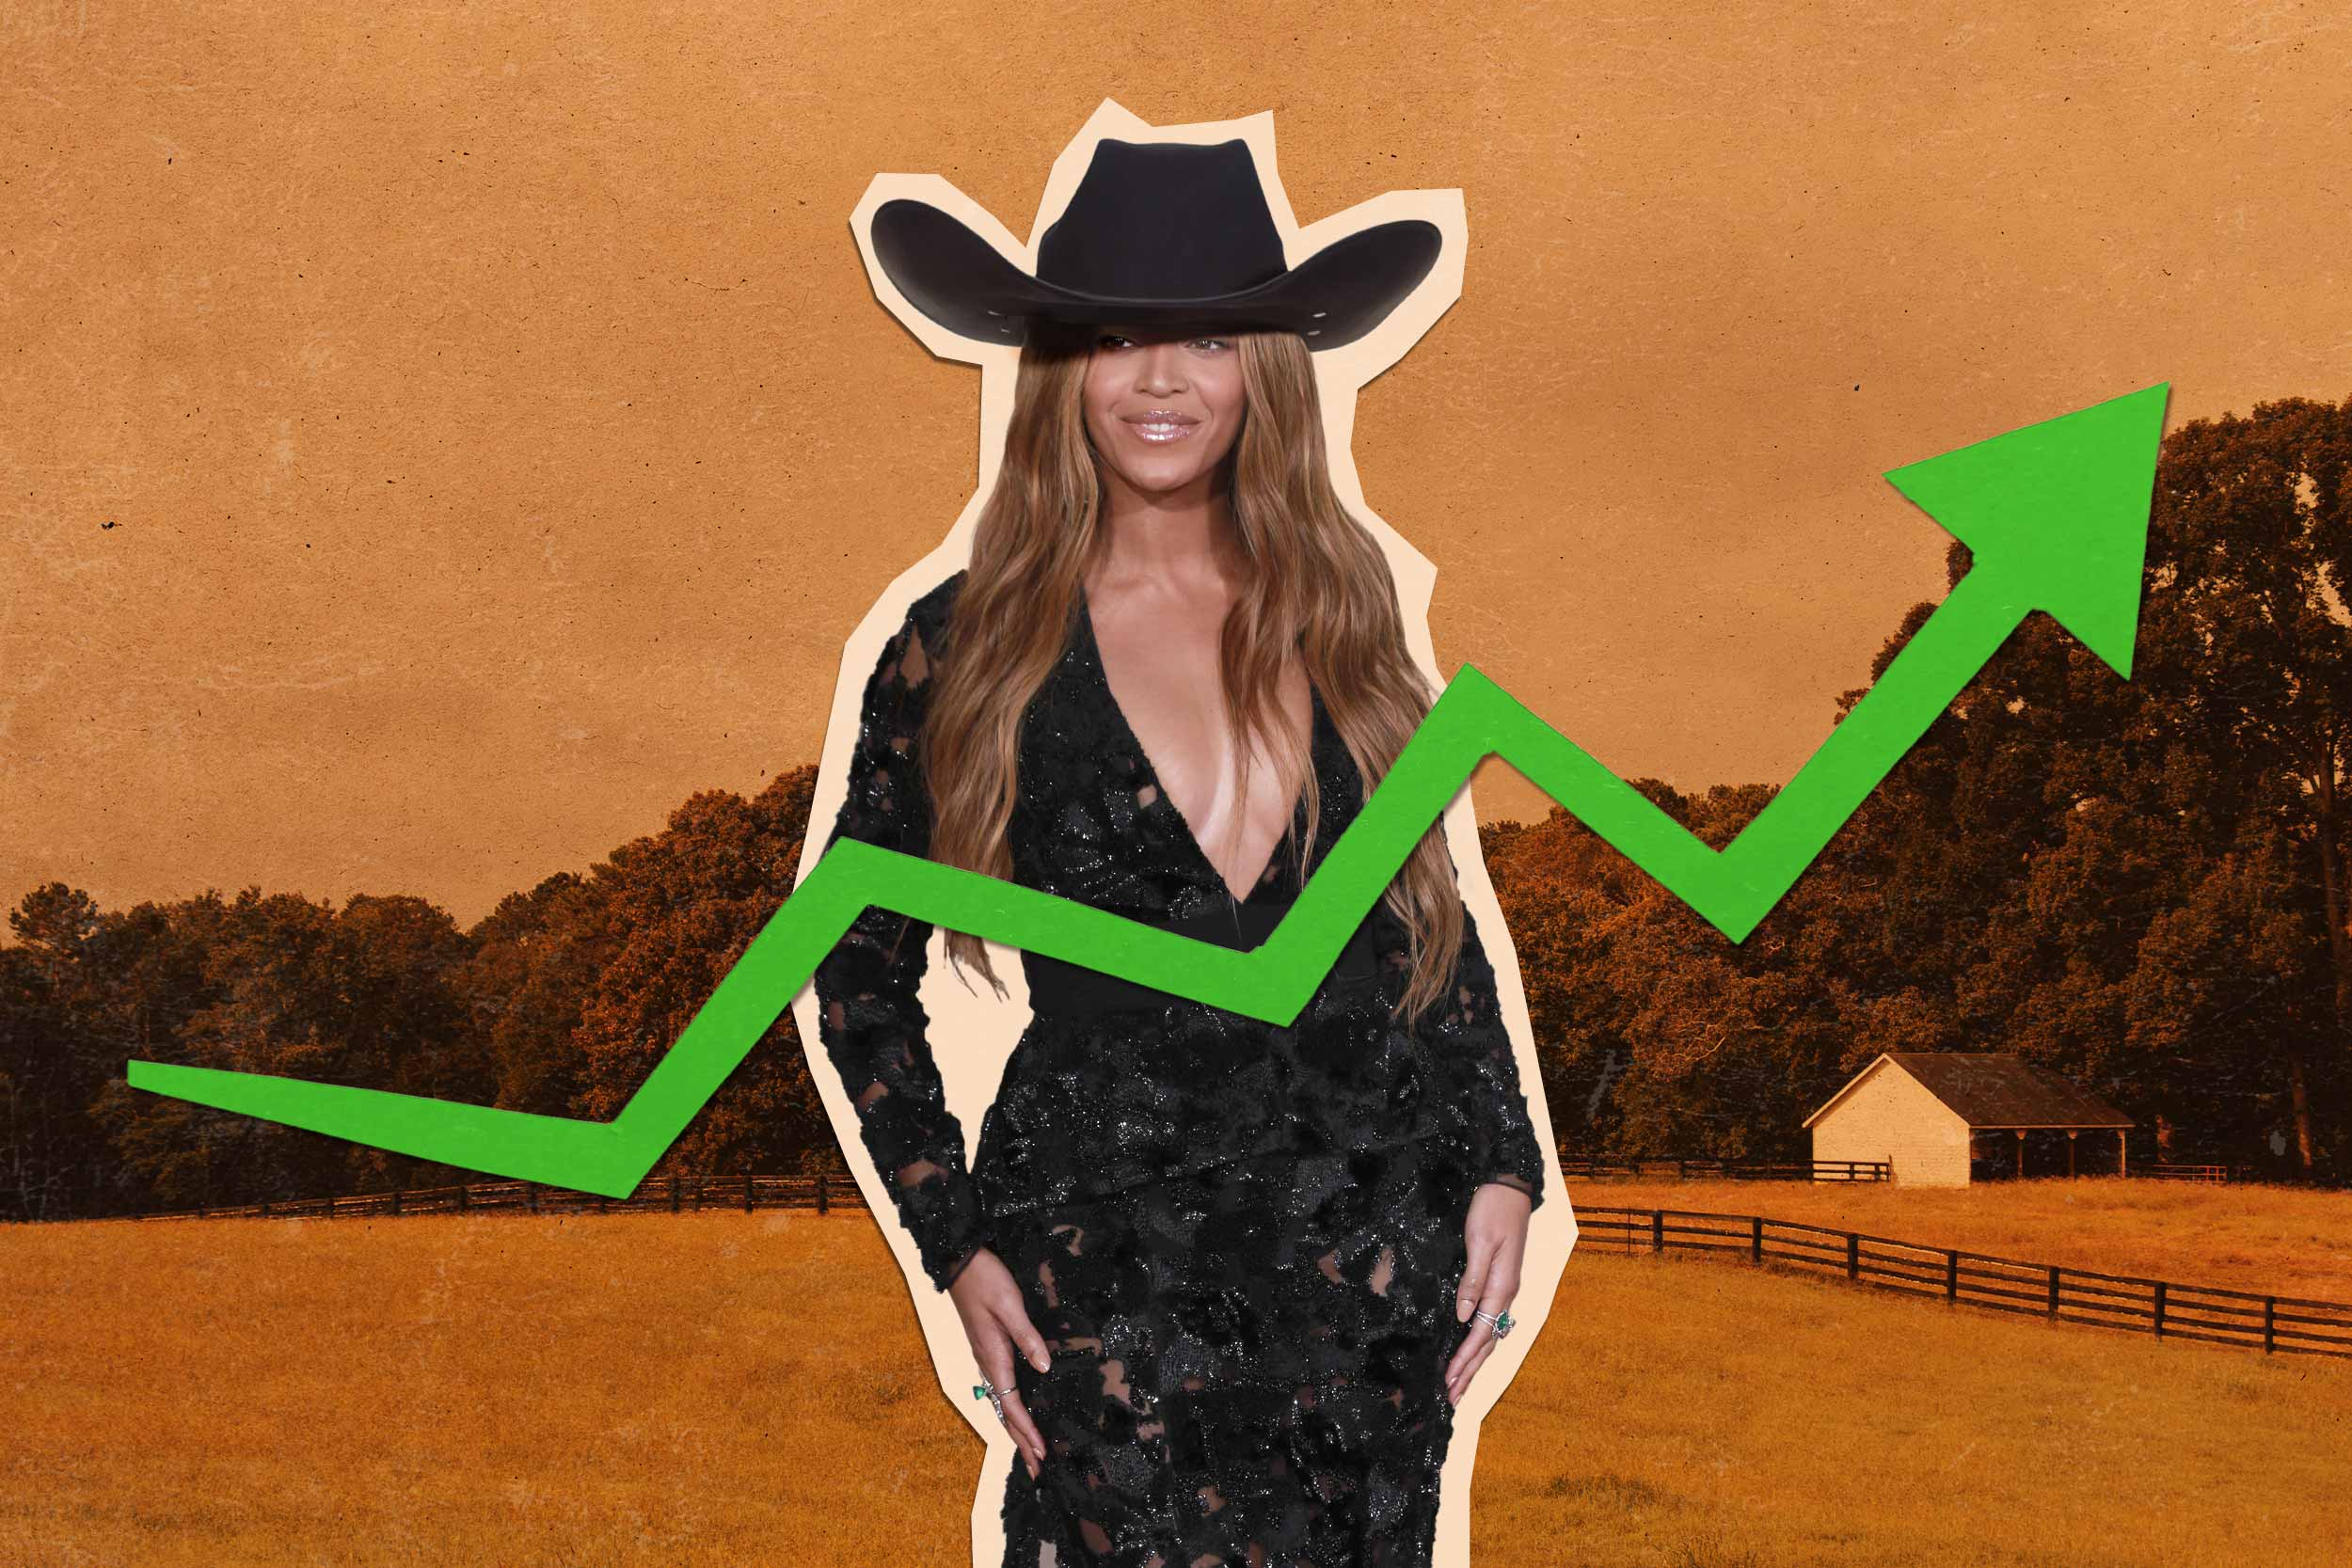 Beyonce's 'Texas Hold 'Em' is No. 1 on Billboard's Hot Country Songs chart  - ABC News